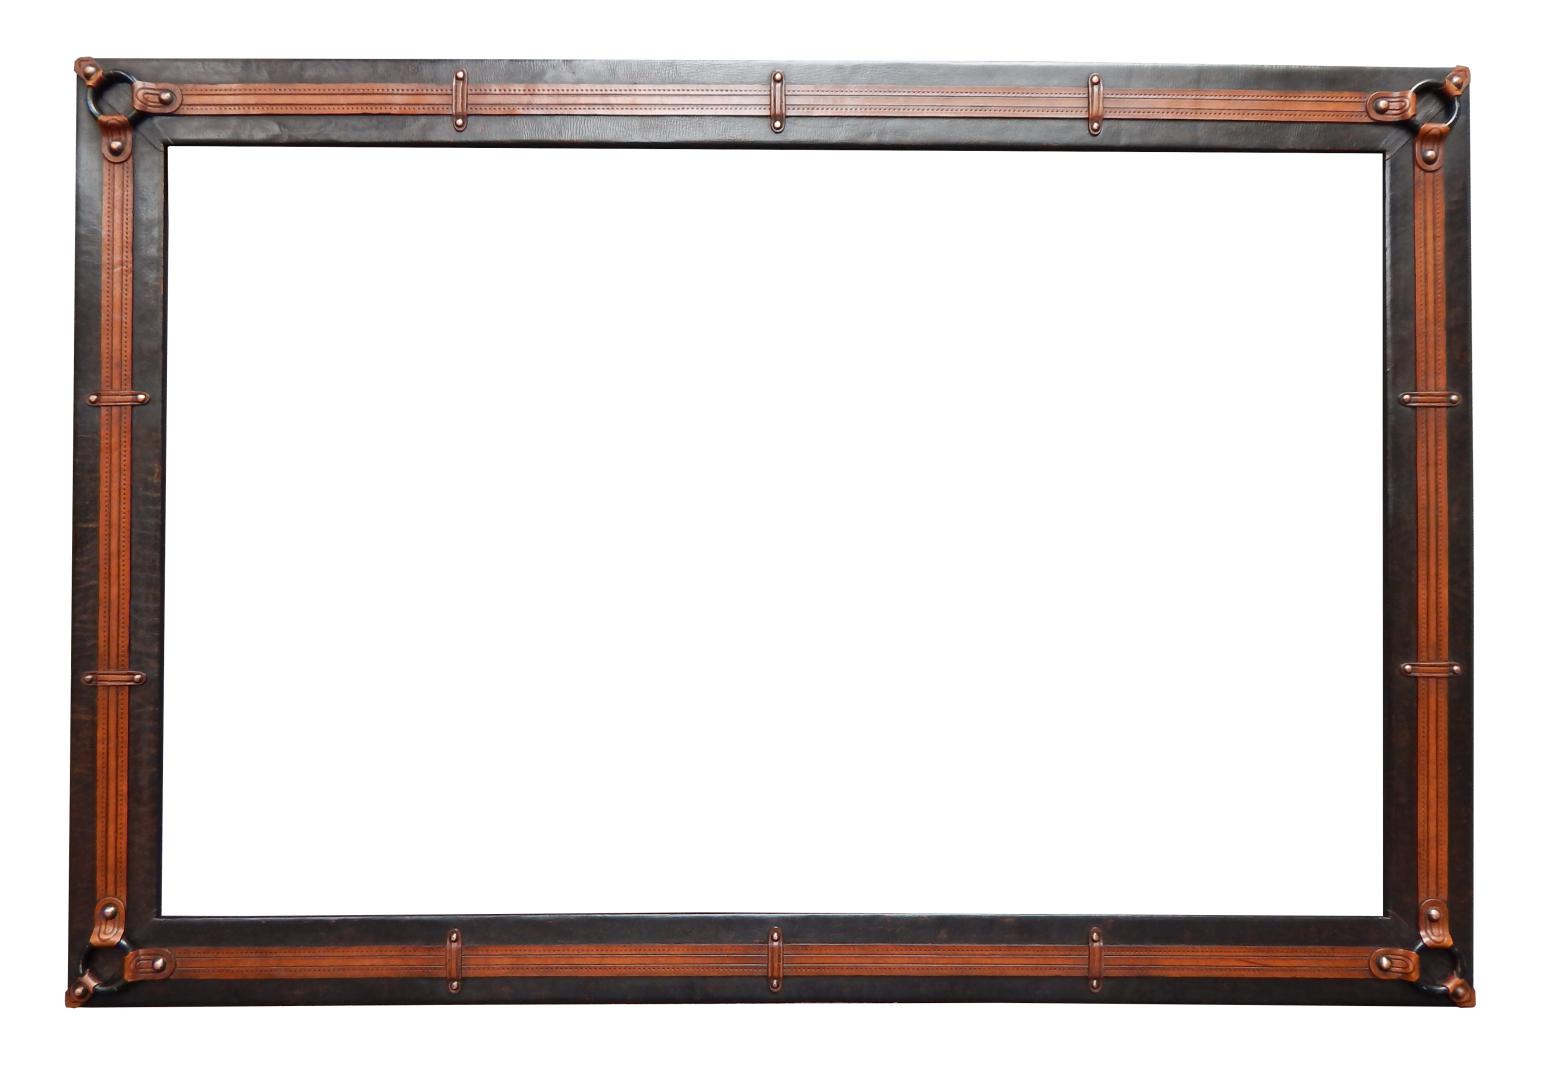 Cinto Leather Mirror Frames